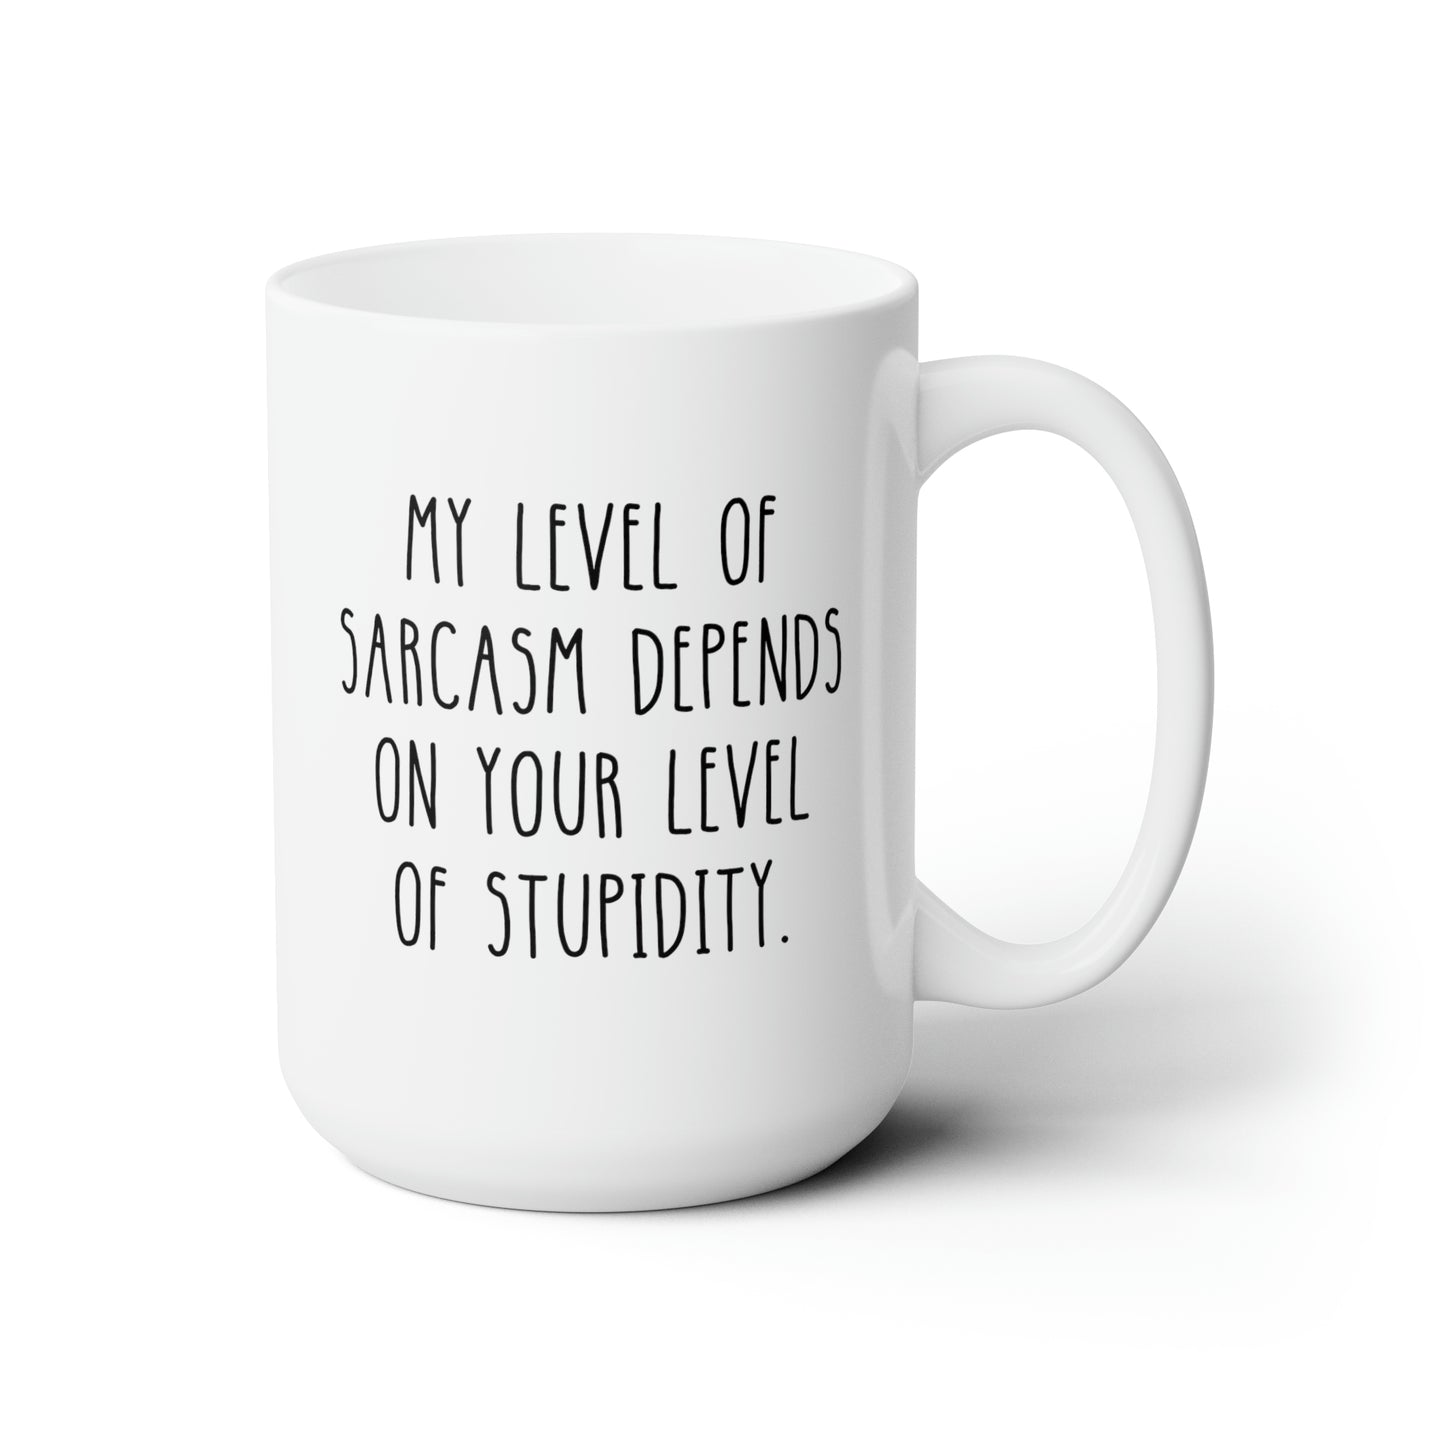 My Level Of Sarcasm Depends On Your Level Of Stupidity 15oz white funny large coffee mug gift novelty ceramic cup sarcastic waveywares wavey wares wavywares wavy wares